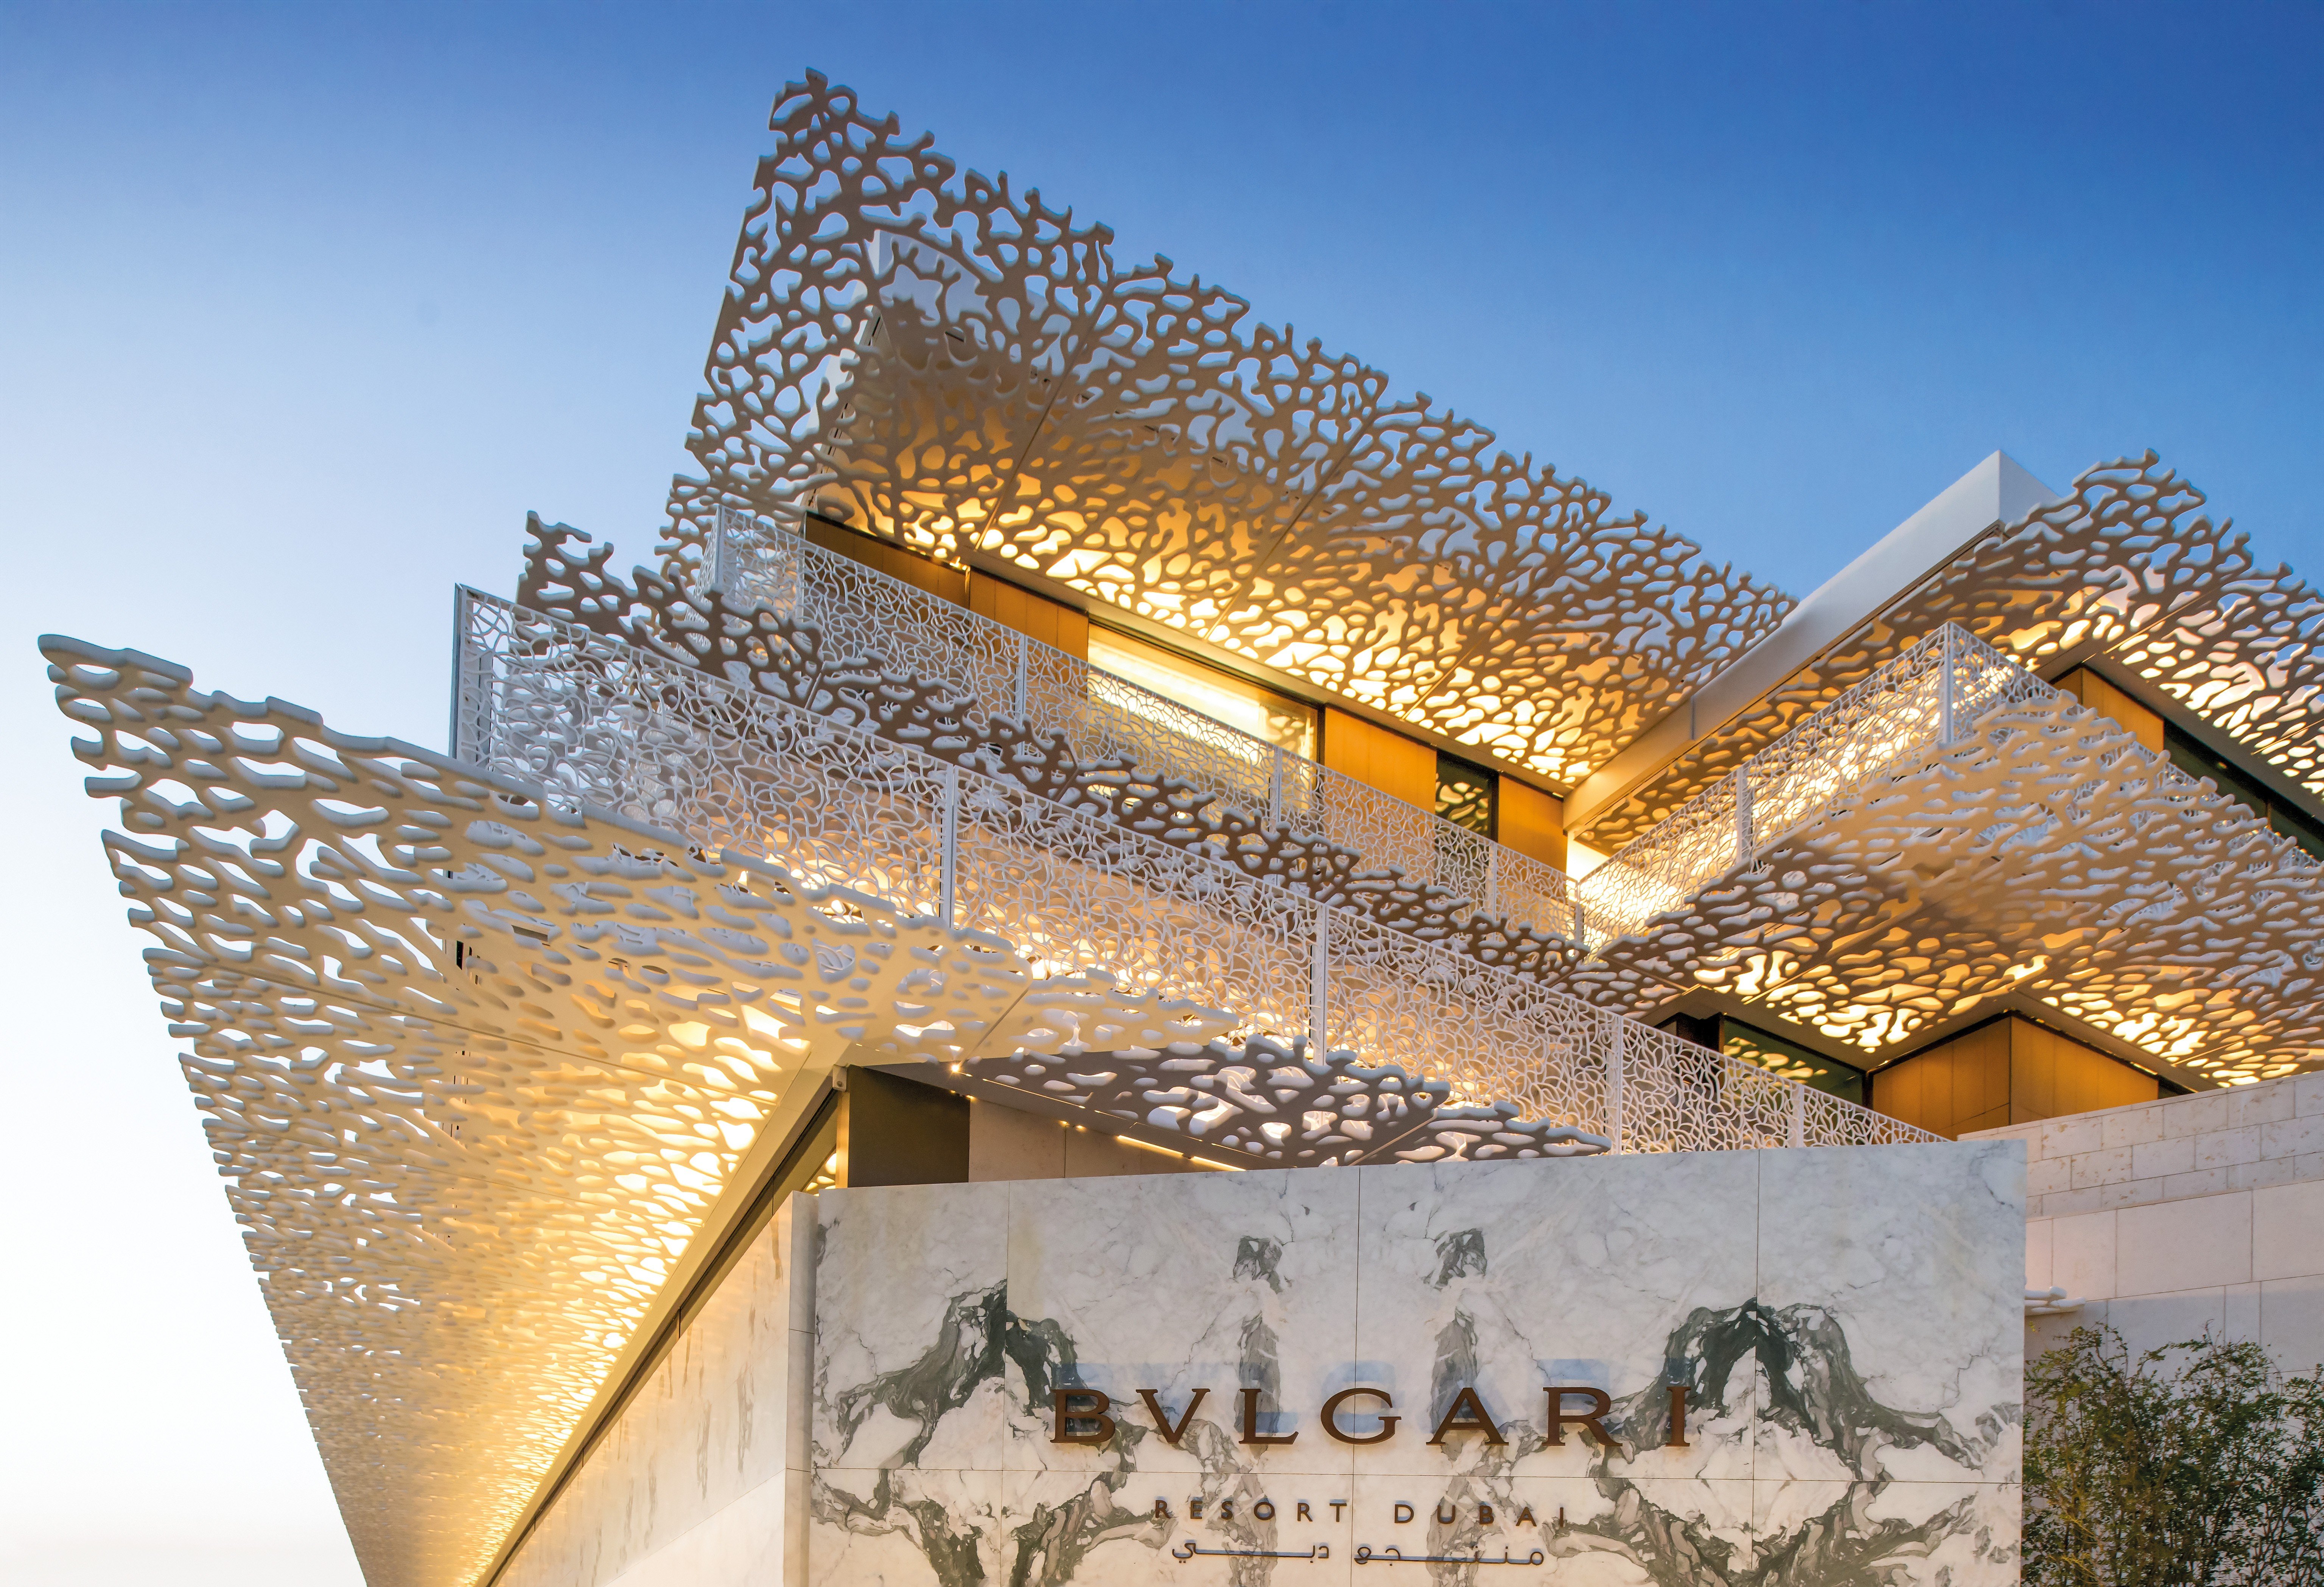 Bulgari, Armani, Versace: why luxury fashion brands open hotels as more get into the game | South China Morning Post